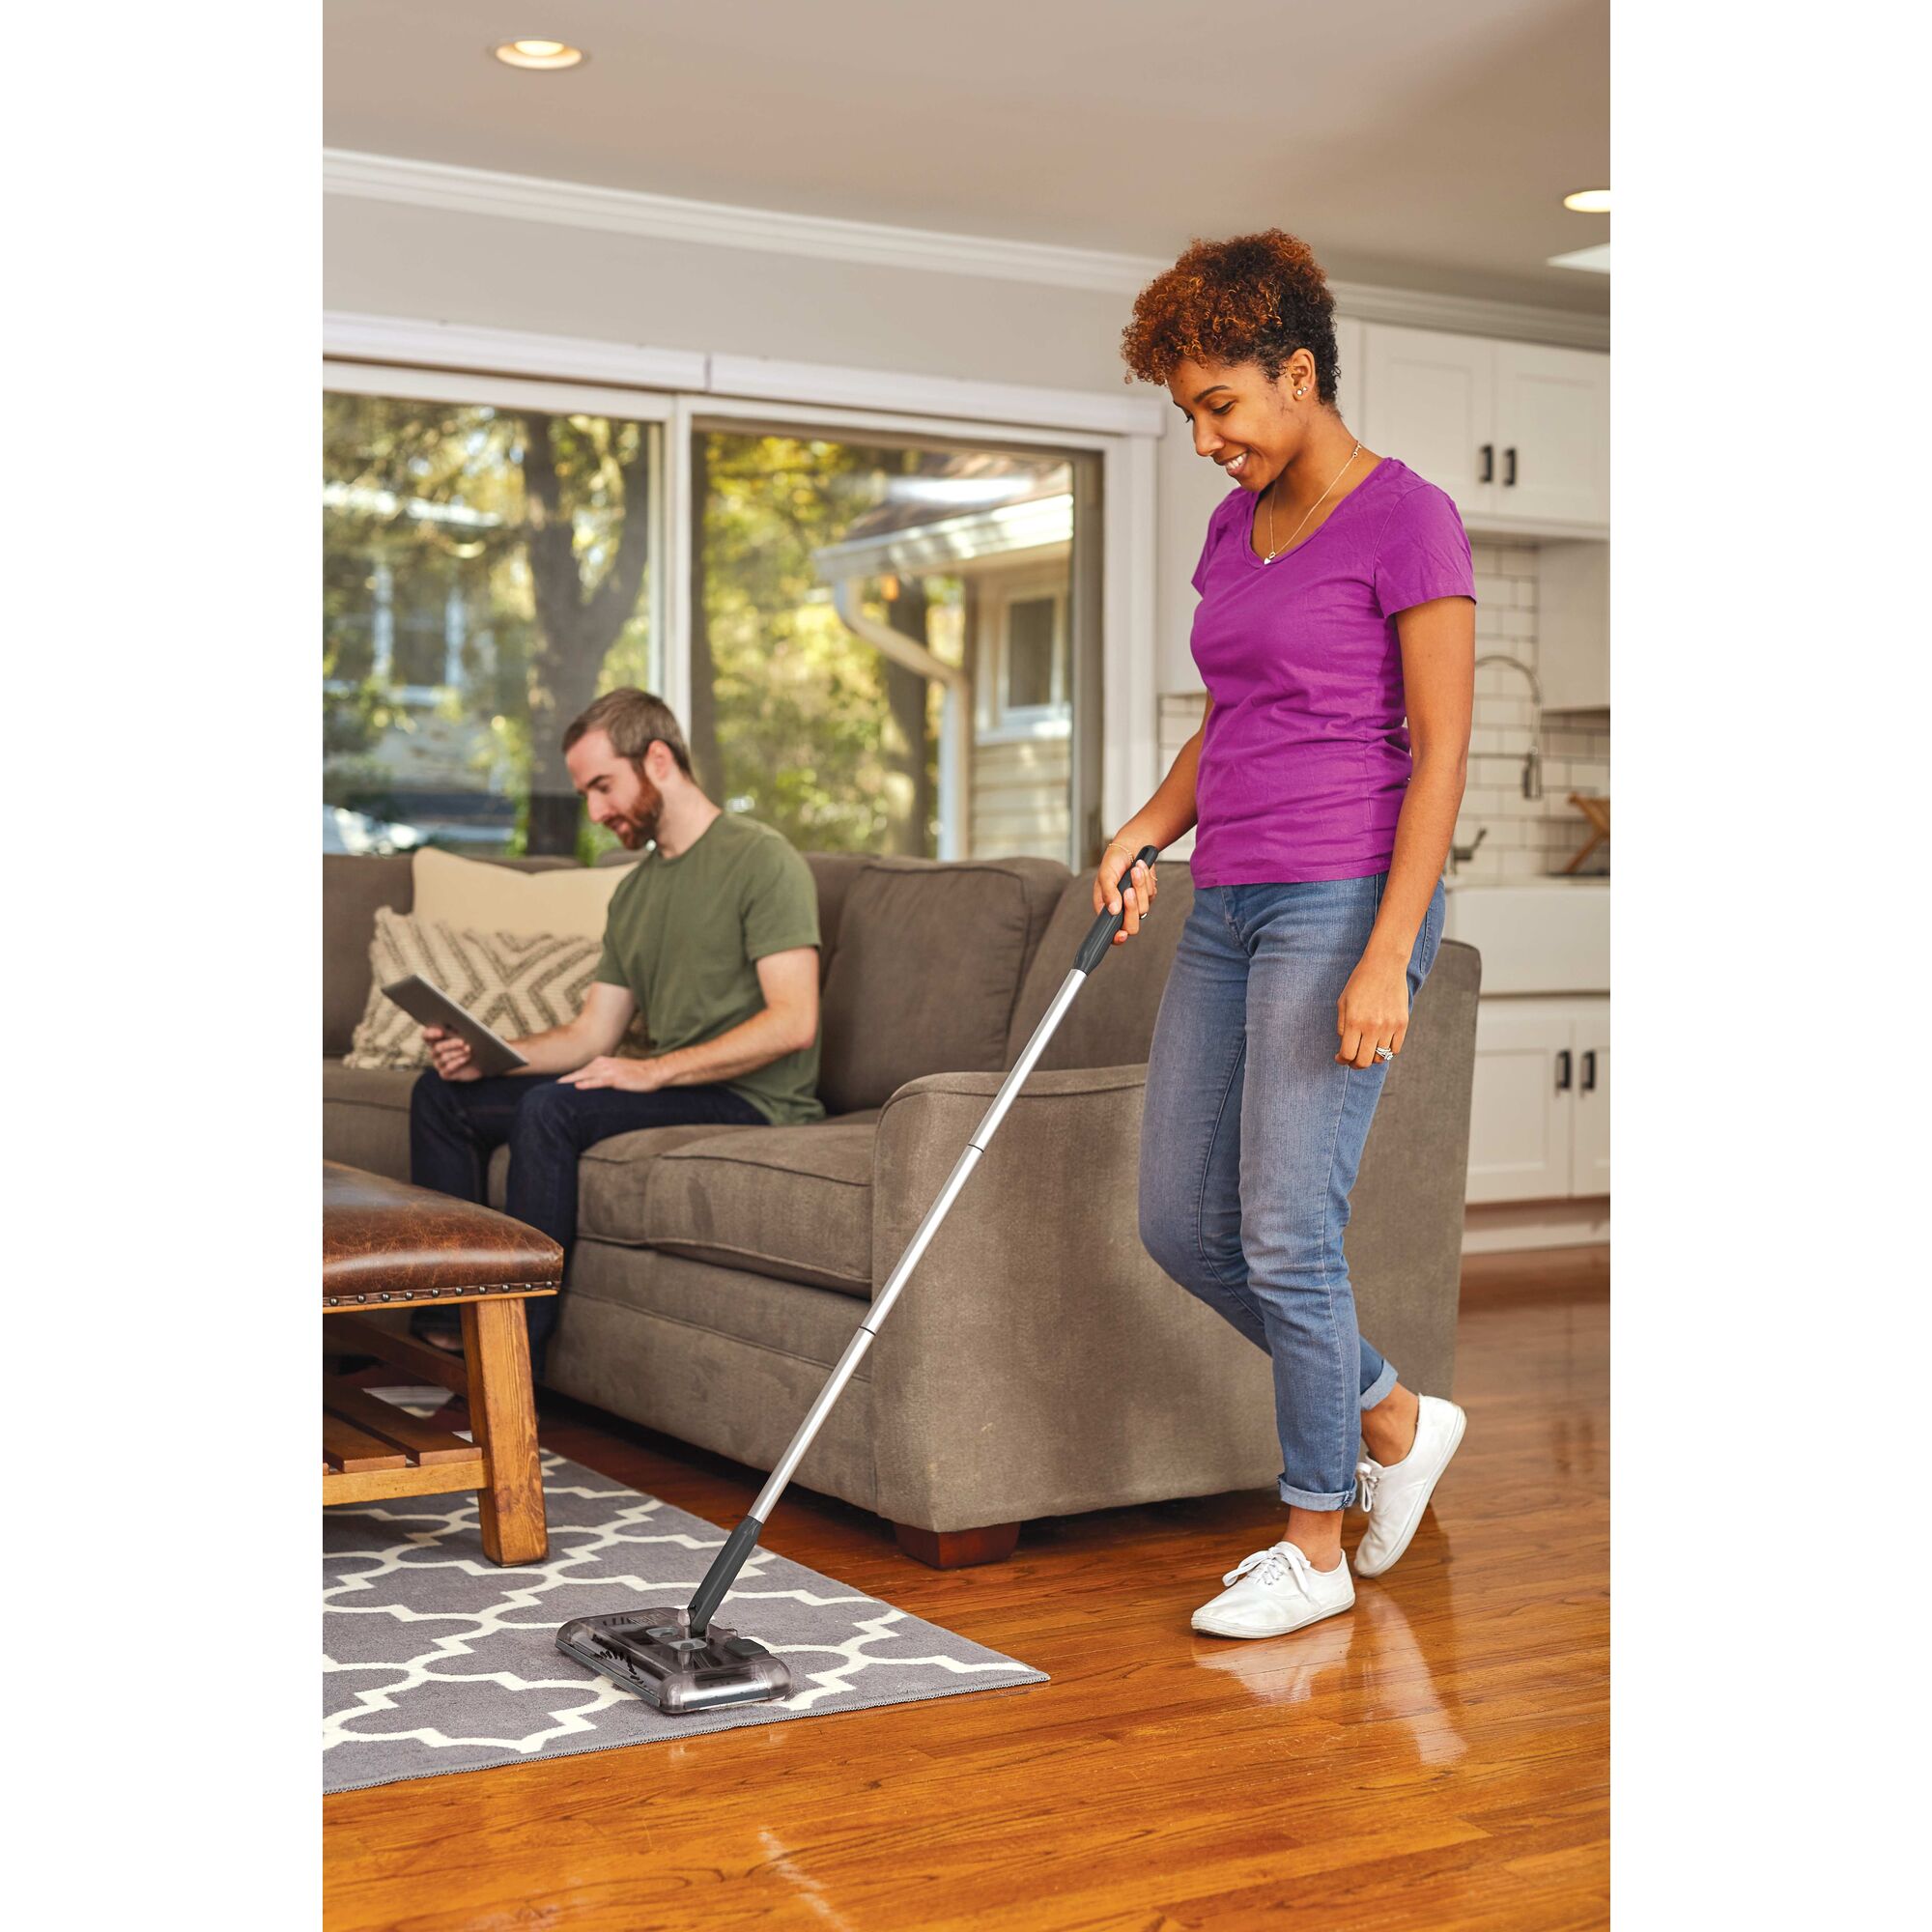 100 Minute Powered Floor Sweeper being used by person on a carpet.